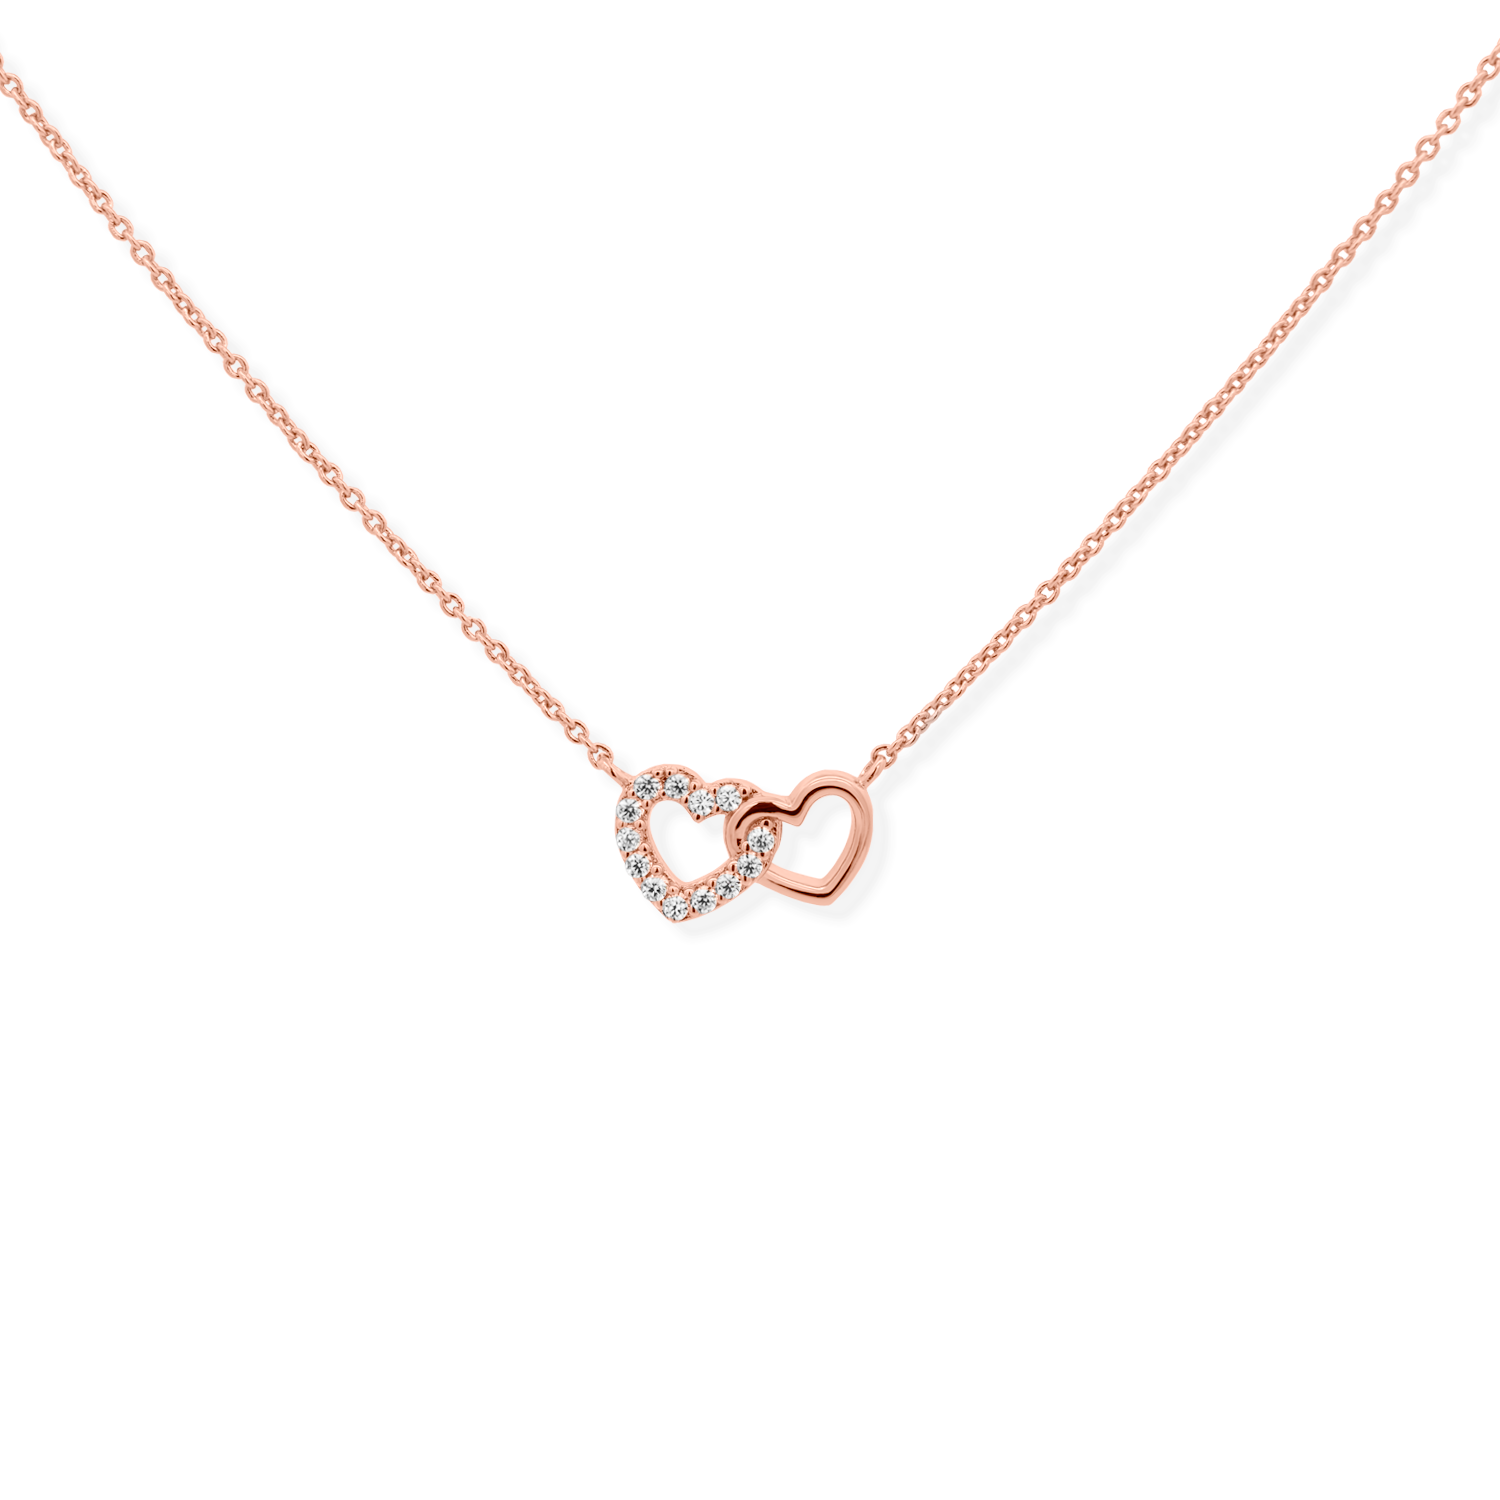 Elegant and dainty necklace with cubic zirconia stones in rose gold.